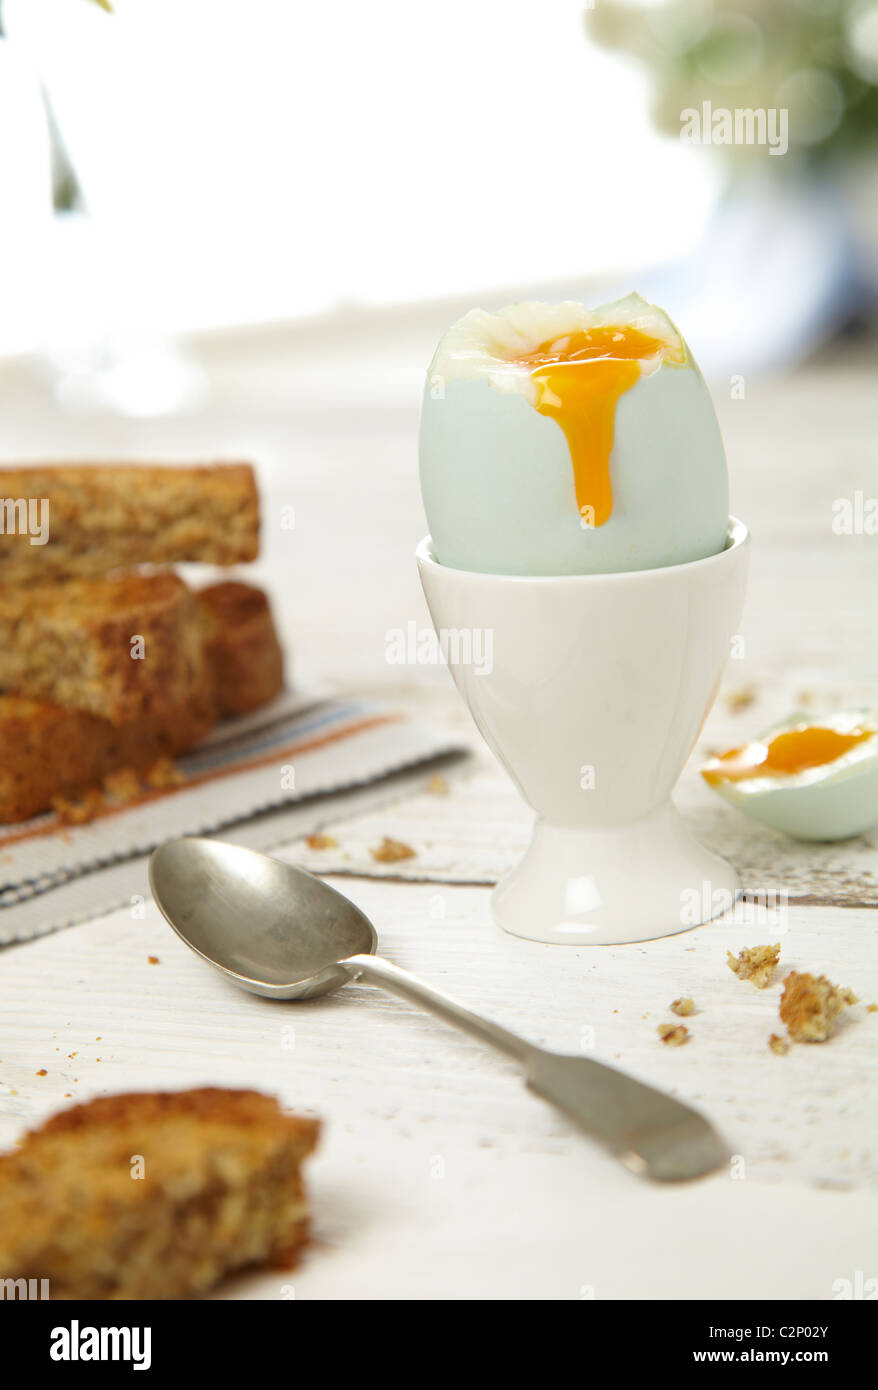 Soft boiled egg with bread toast spoon in bright contemporary setting spoon dripping yolk Stock Photo